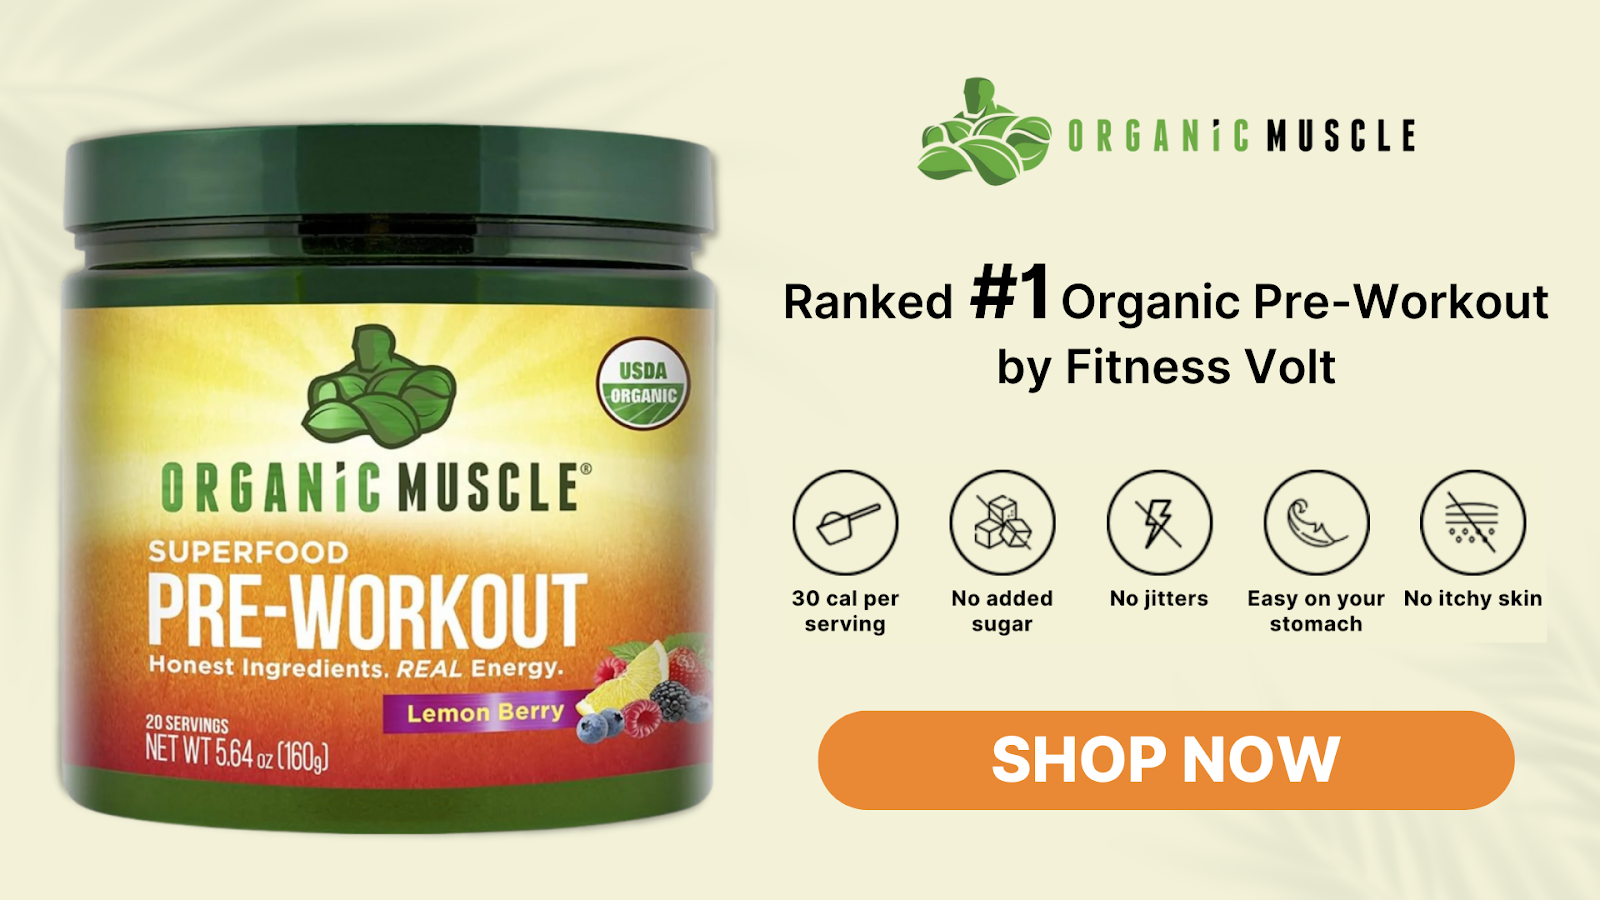 pre-workout lemon berry flavor by organic muscle